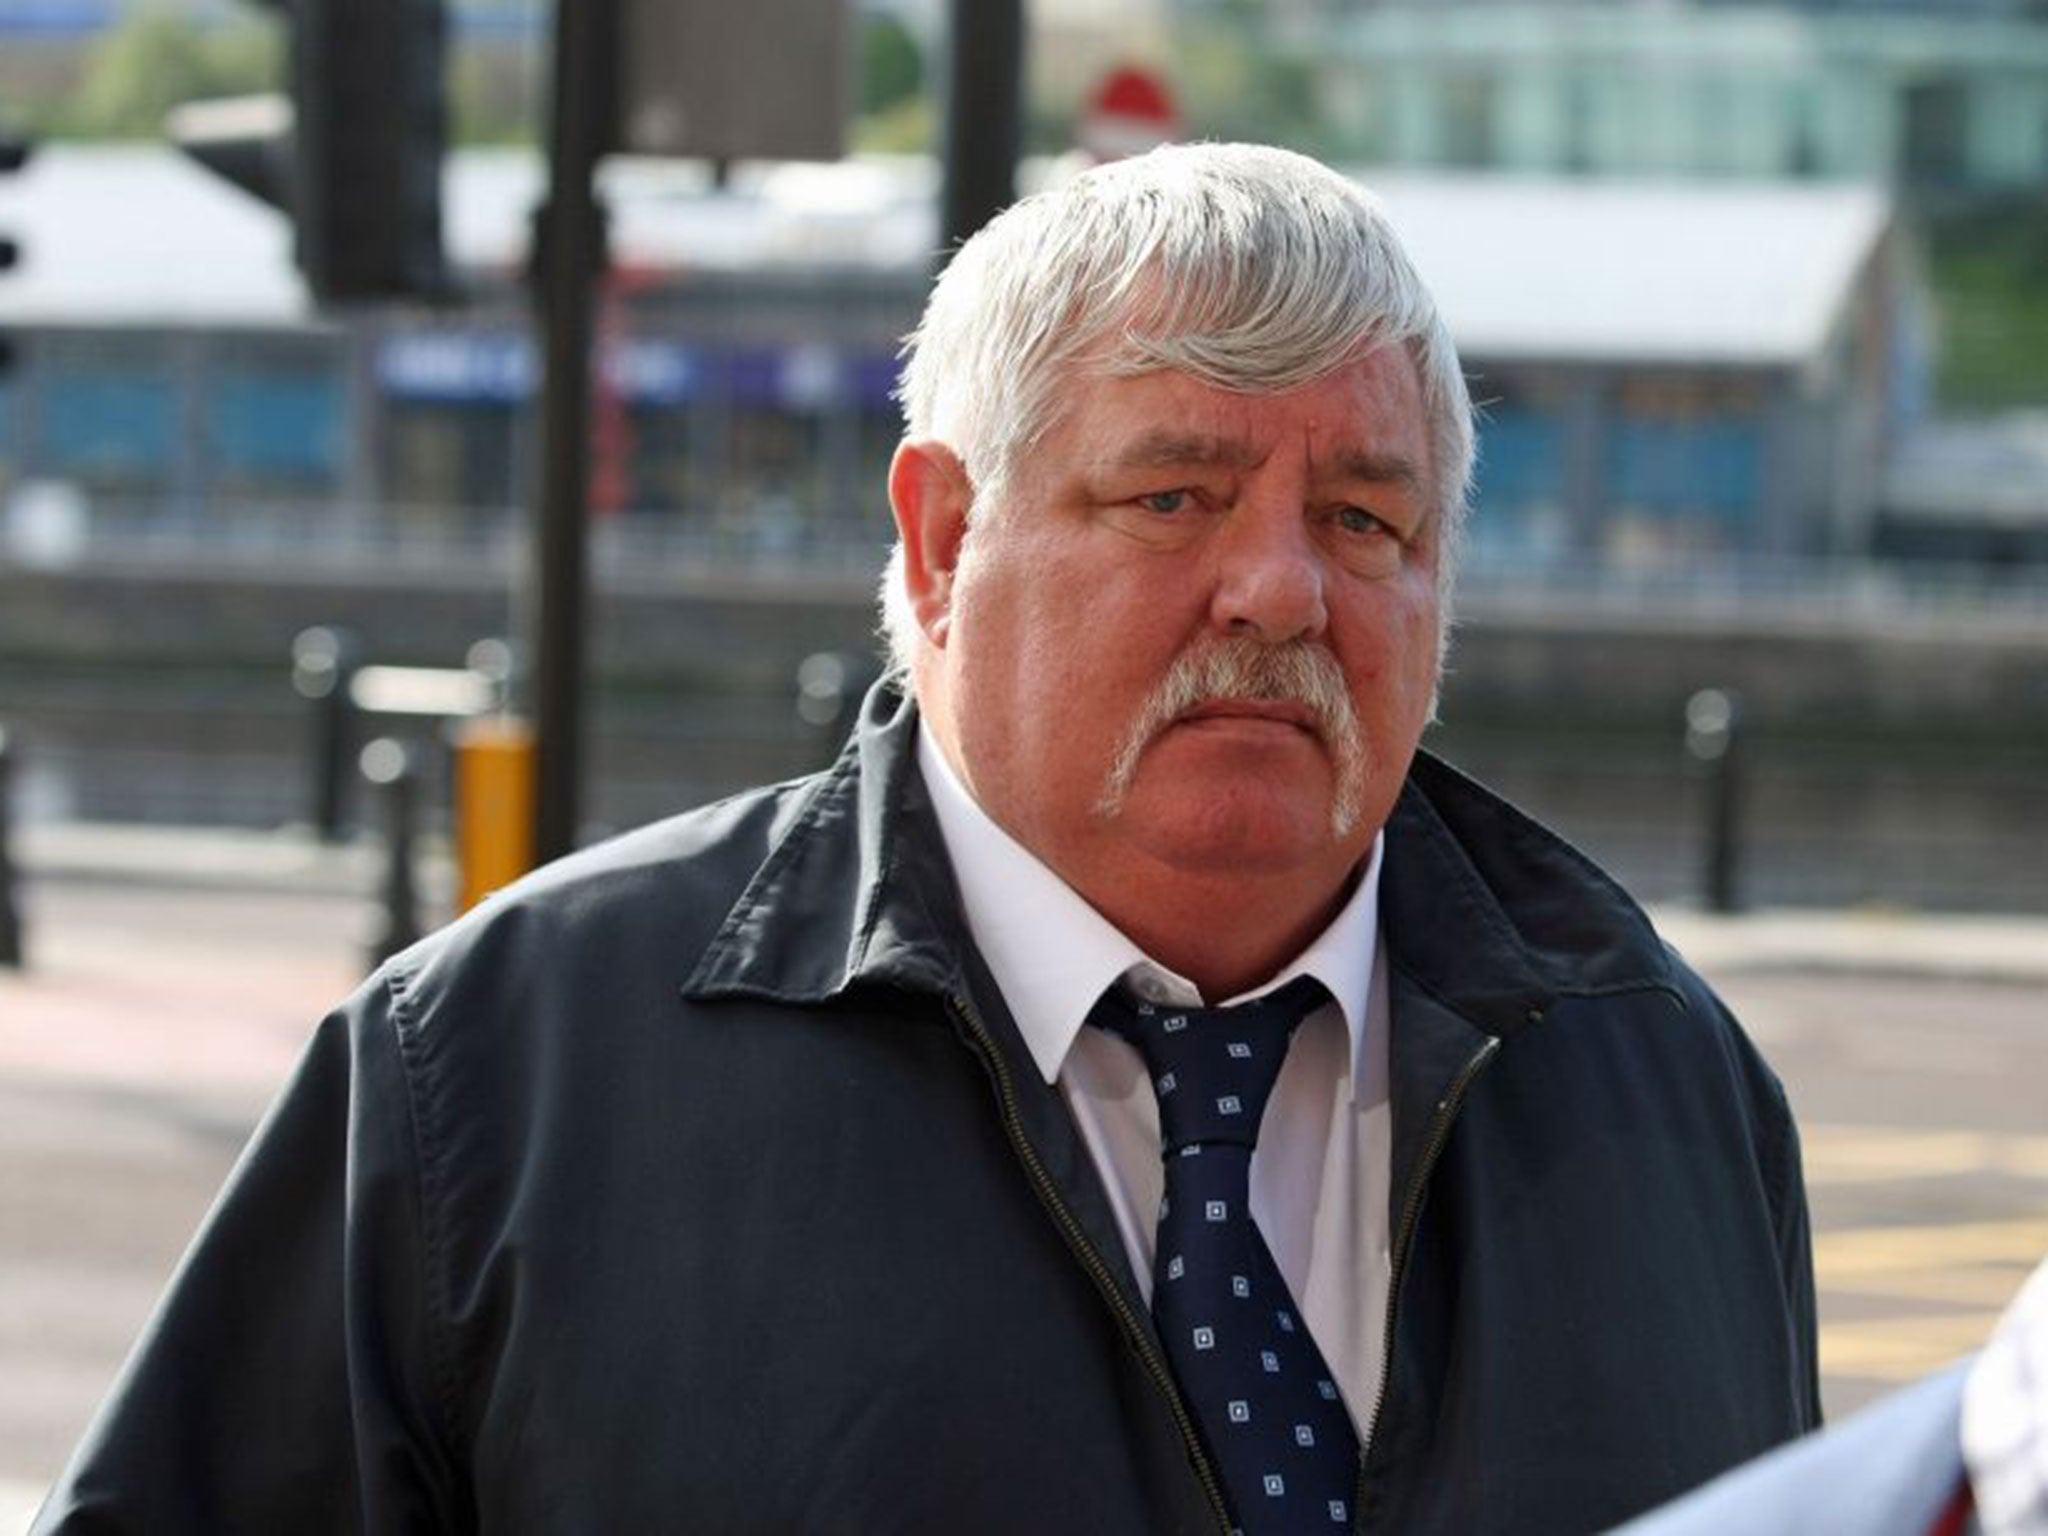 John Yates, a bus driver who failed to stop for 24 metres after hitting and dragging a cyclist under his vehicle, arriving at Newcastle Crown Court 